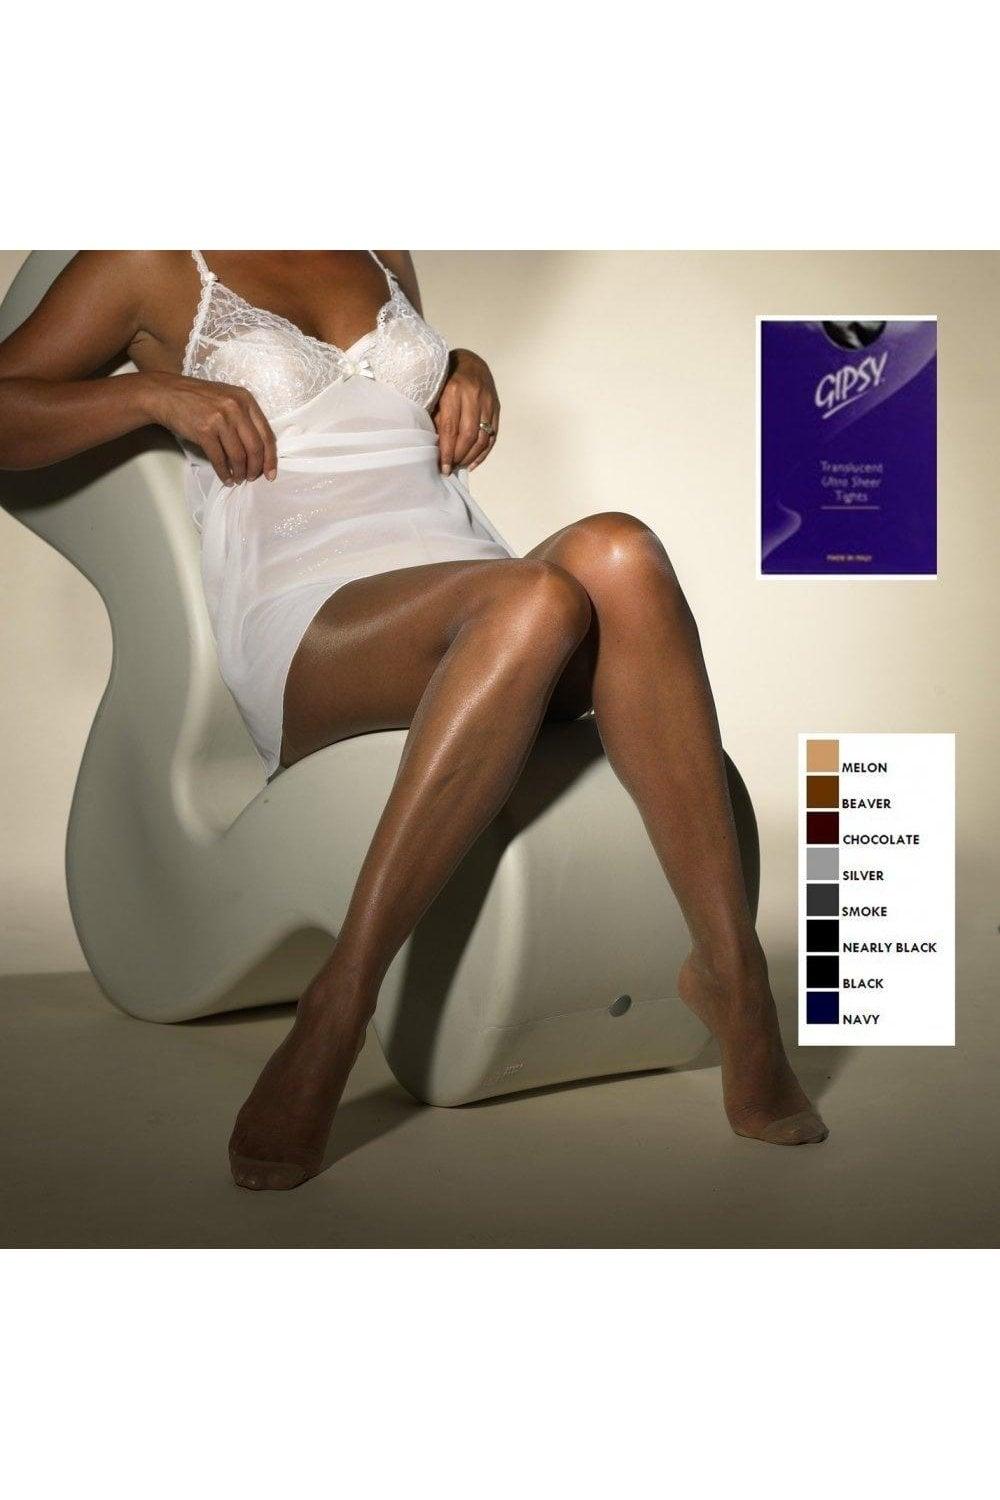 best of You smoke pantyhose wear in Can